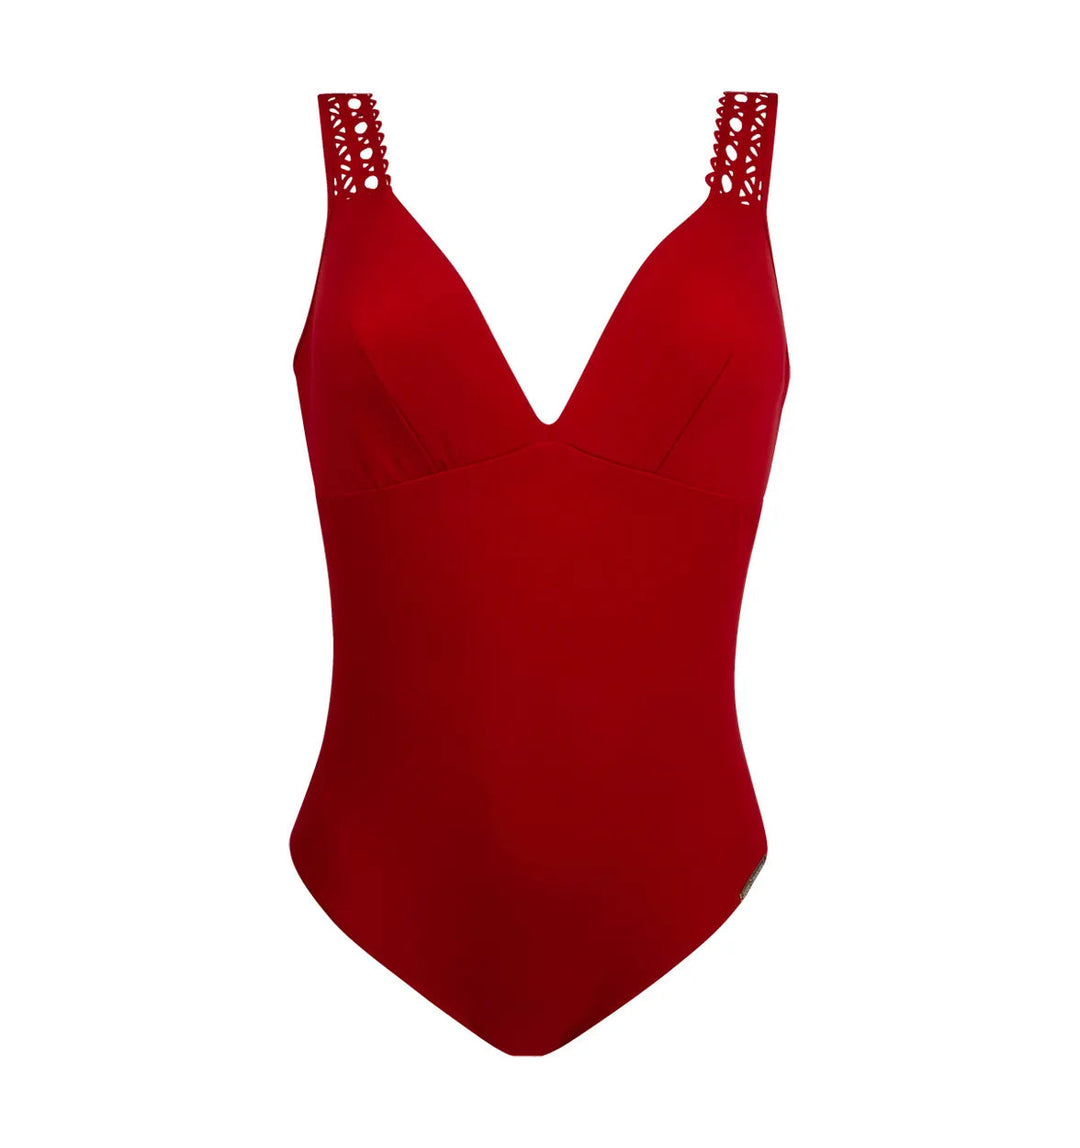 Lise Charmel - Ajourage Couture Unwired Swimsuit Tango Couture Unwired Swimsuit Lise Charmel Swimwear 